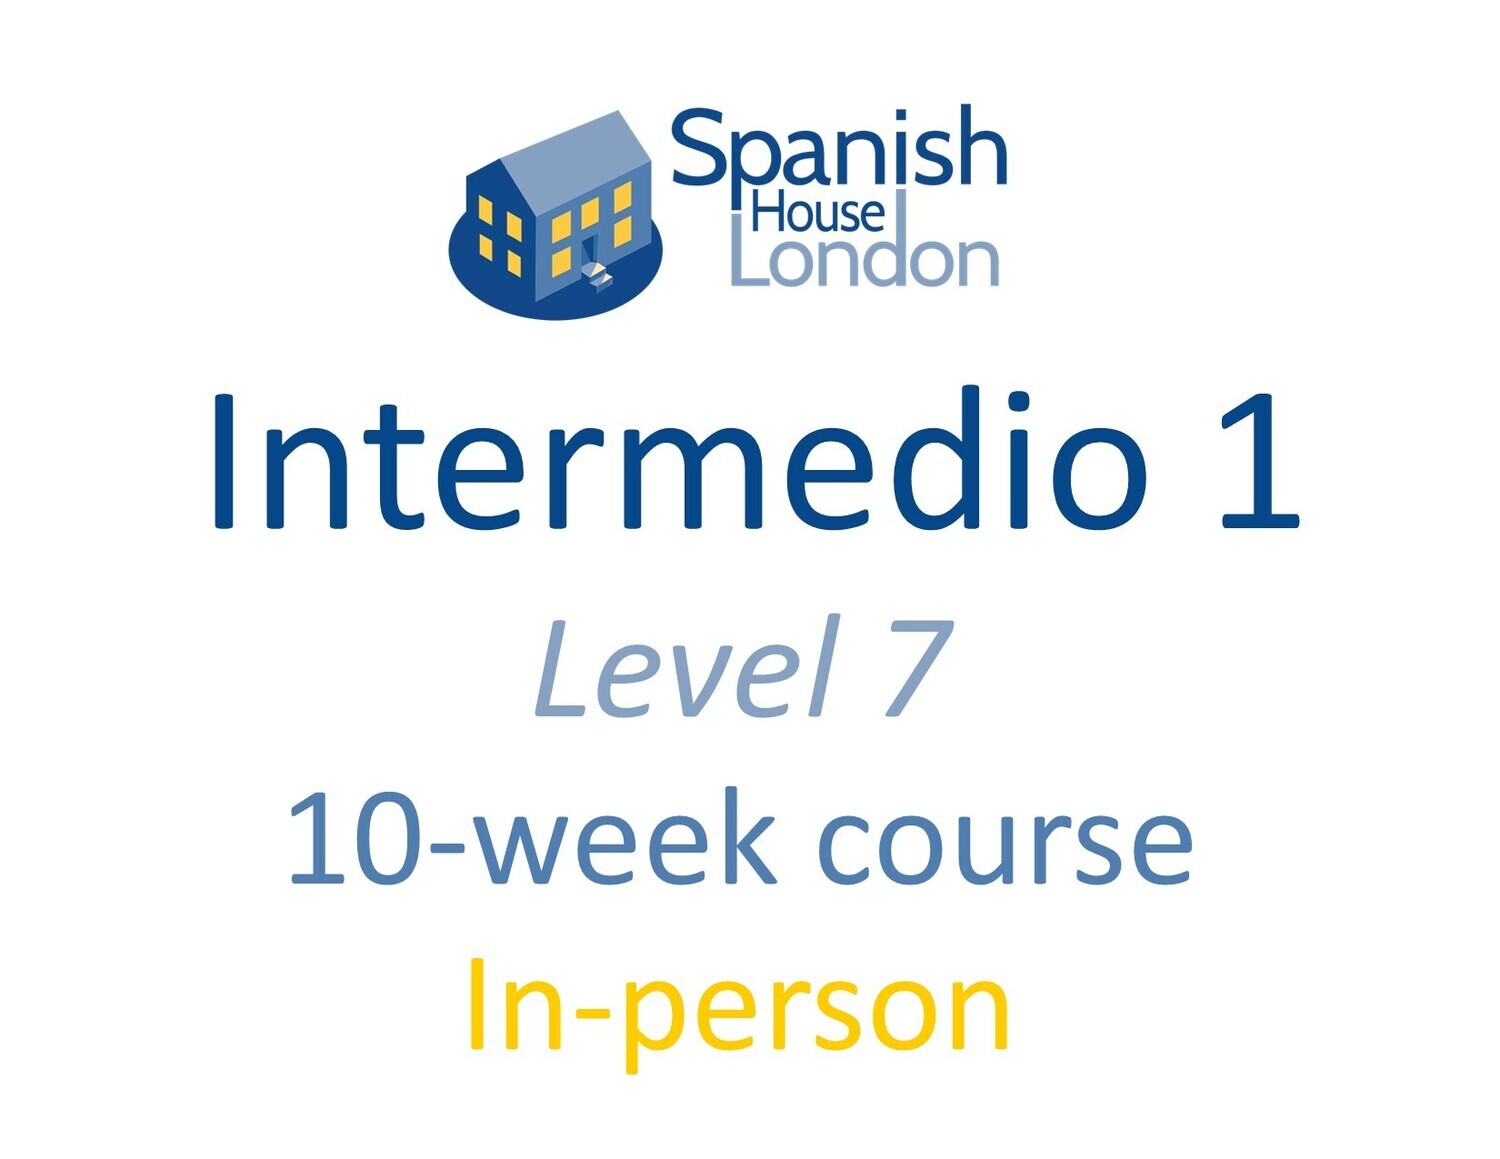 Intermedio 1 Course starting on 20th September at 7.30pm in Clapham North